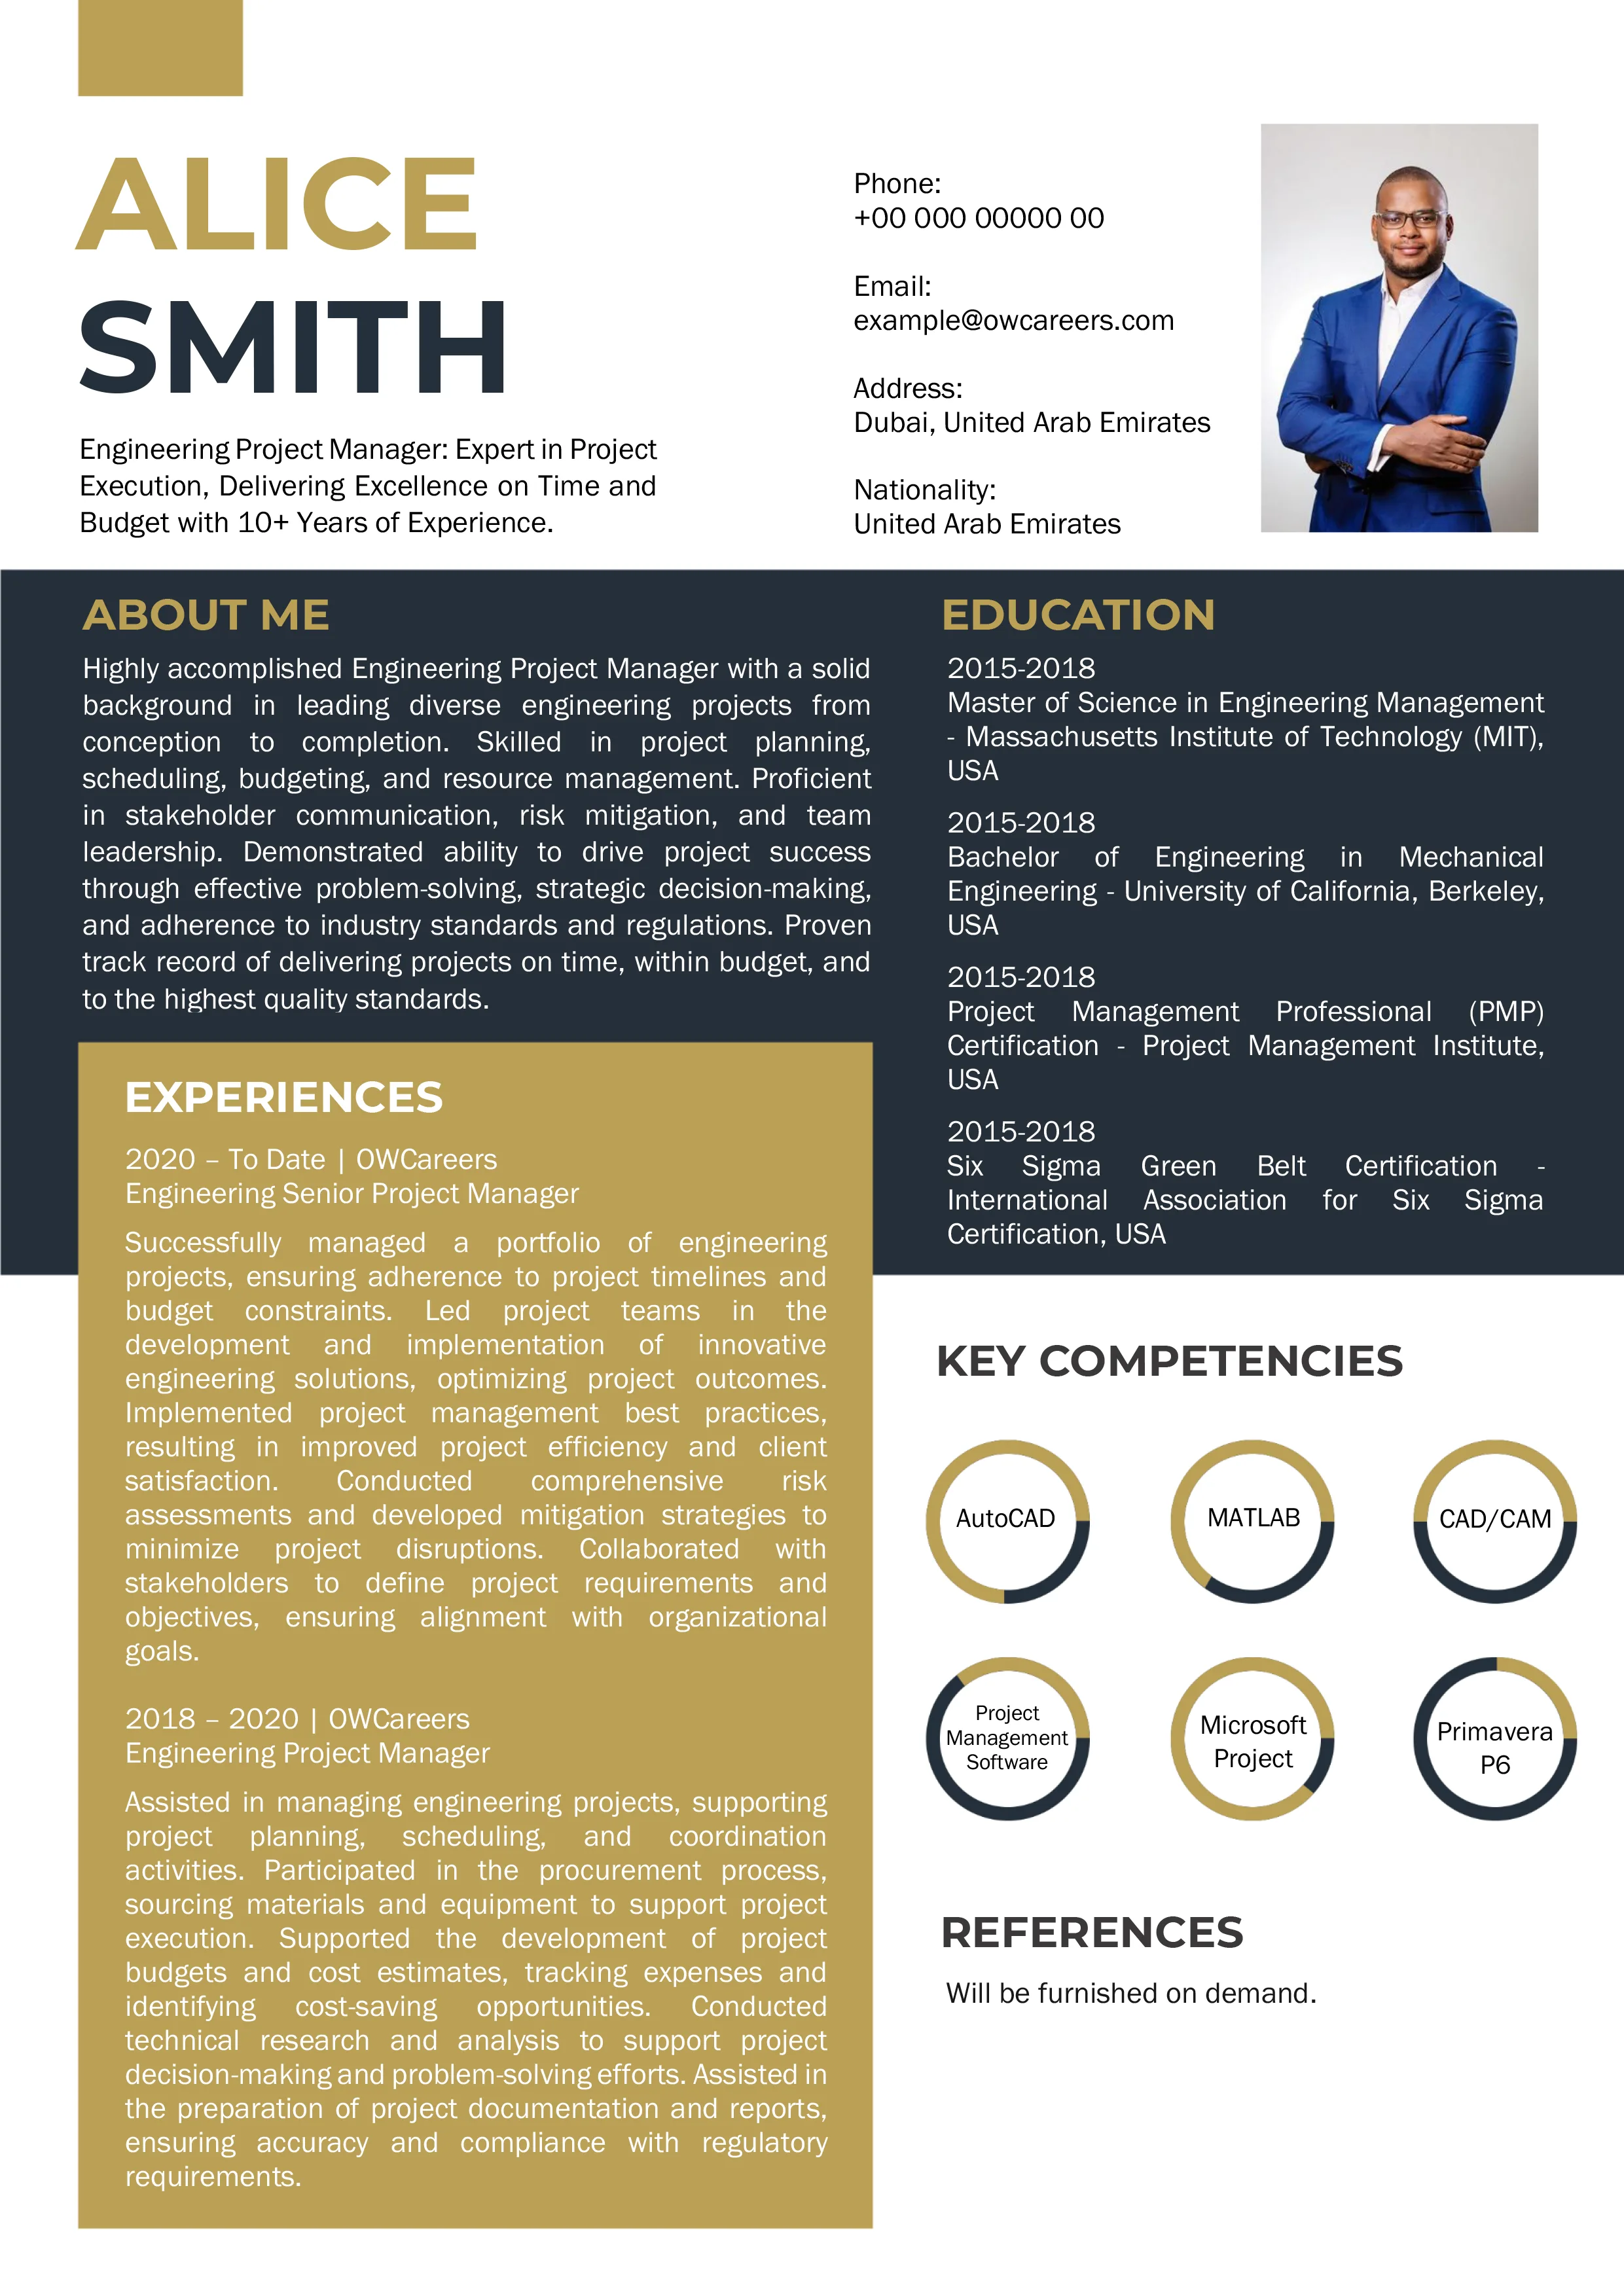 Engineering Project Manager CV